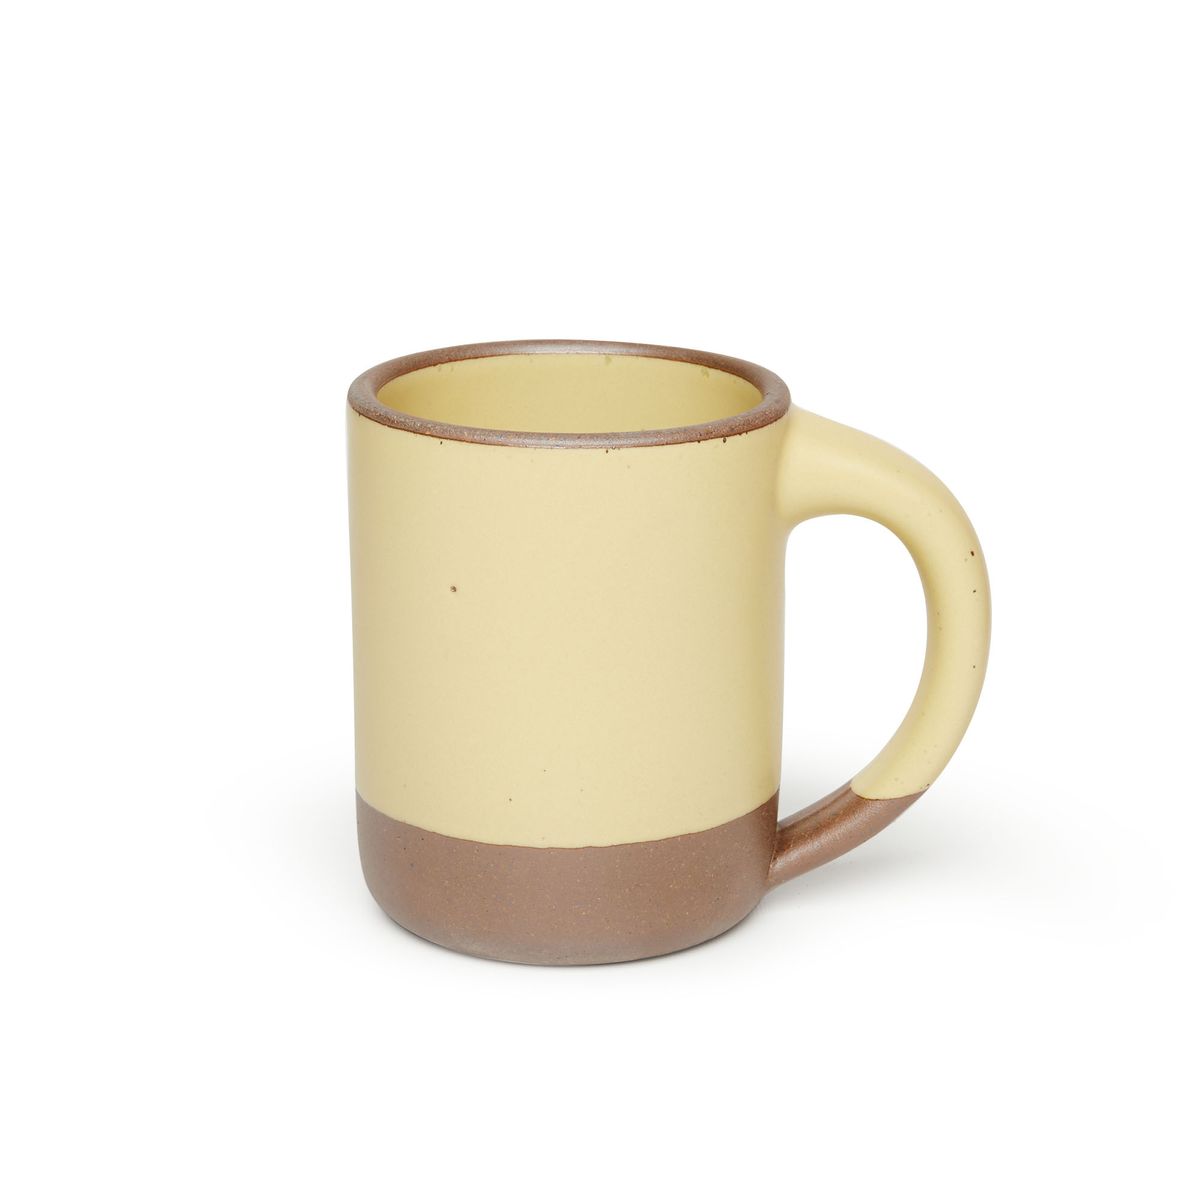 A big sized ceramic mug with handle in a light butter yellow glaze featuring iron speckles and unglazed rim and bottom base